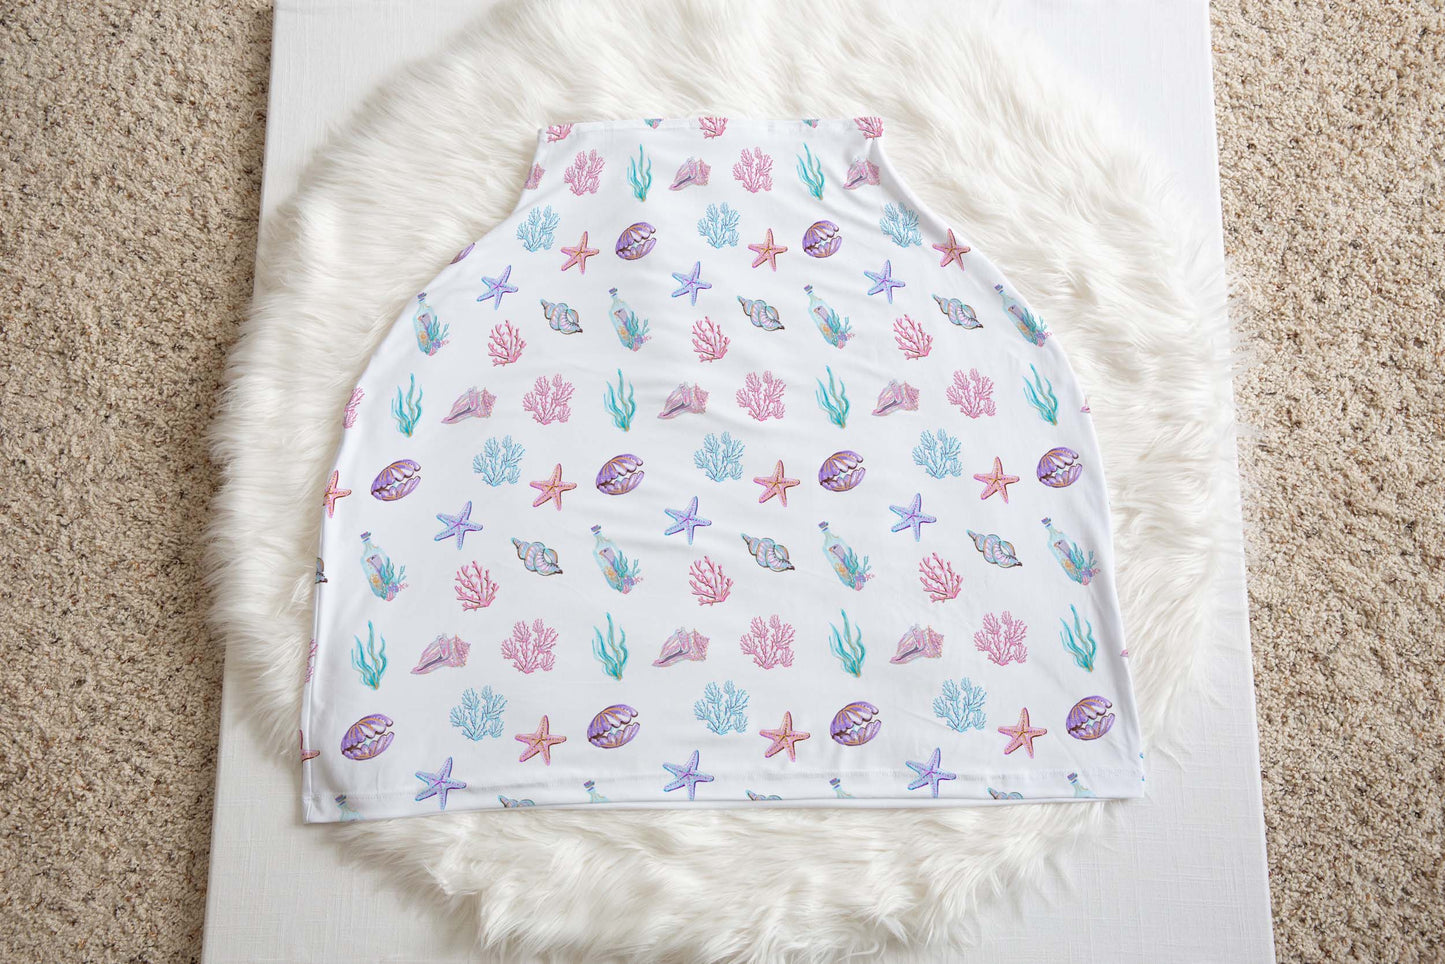 Shells Car Seat Cover, Under the sea nursing cover - Pink Mermaid